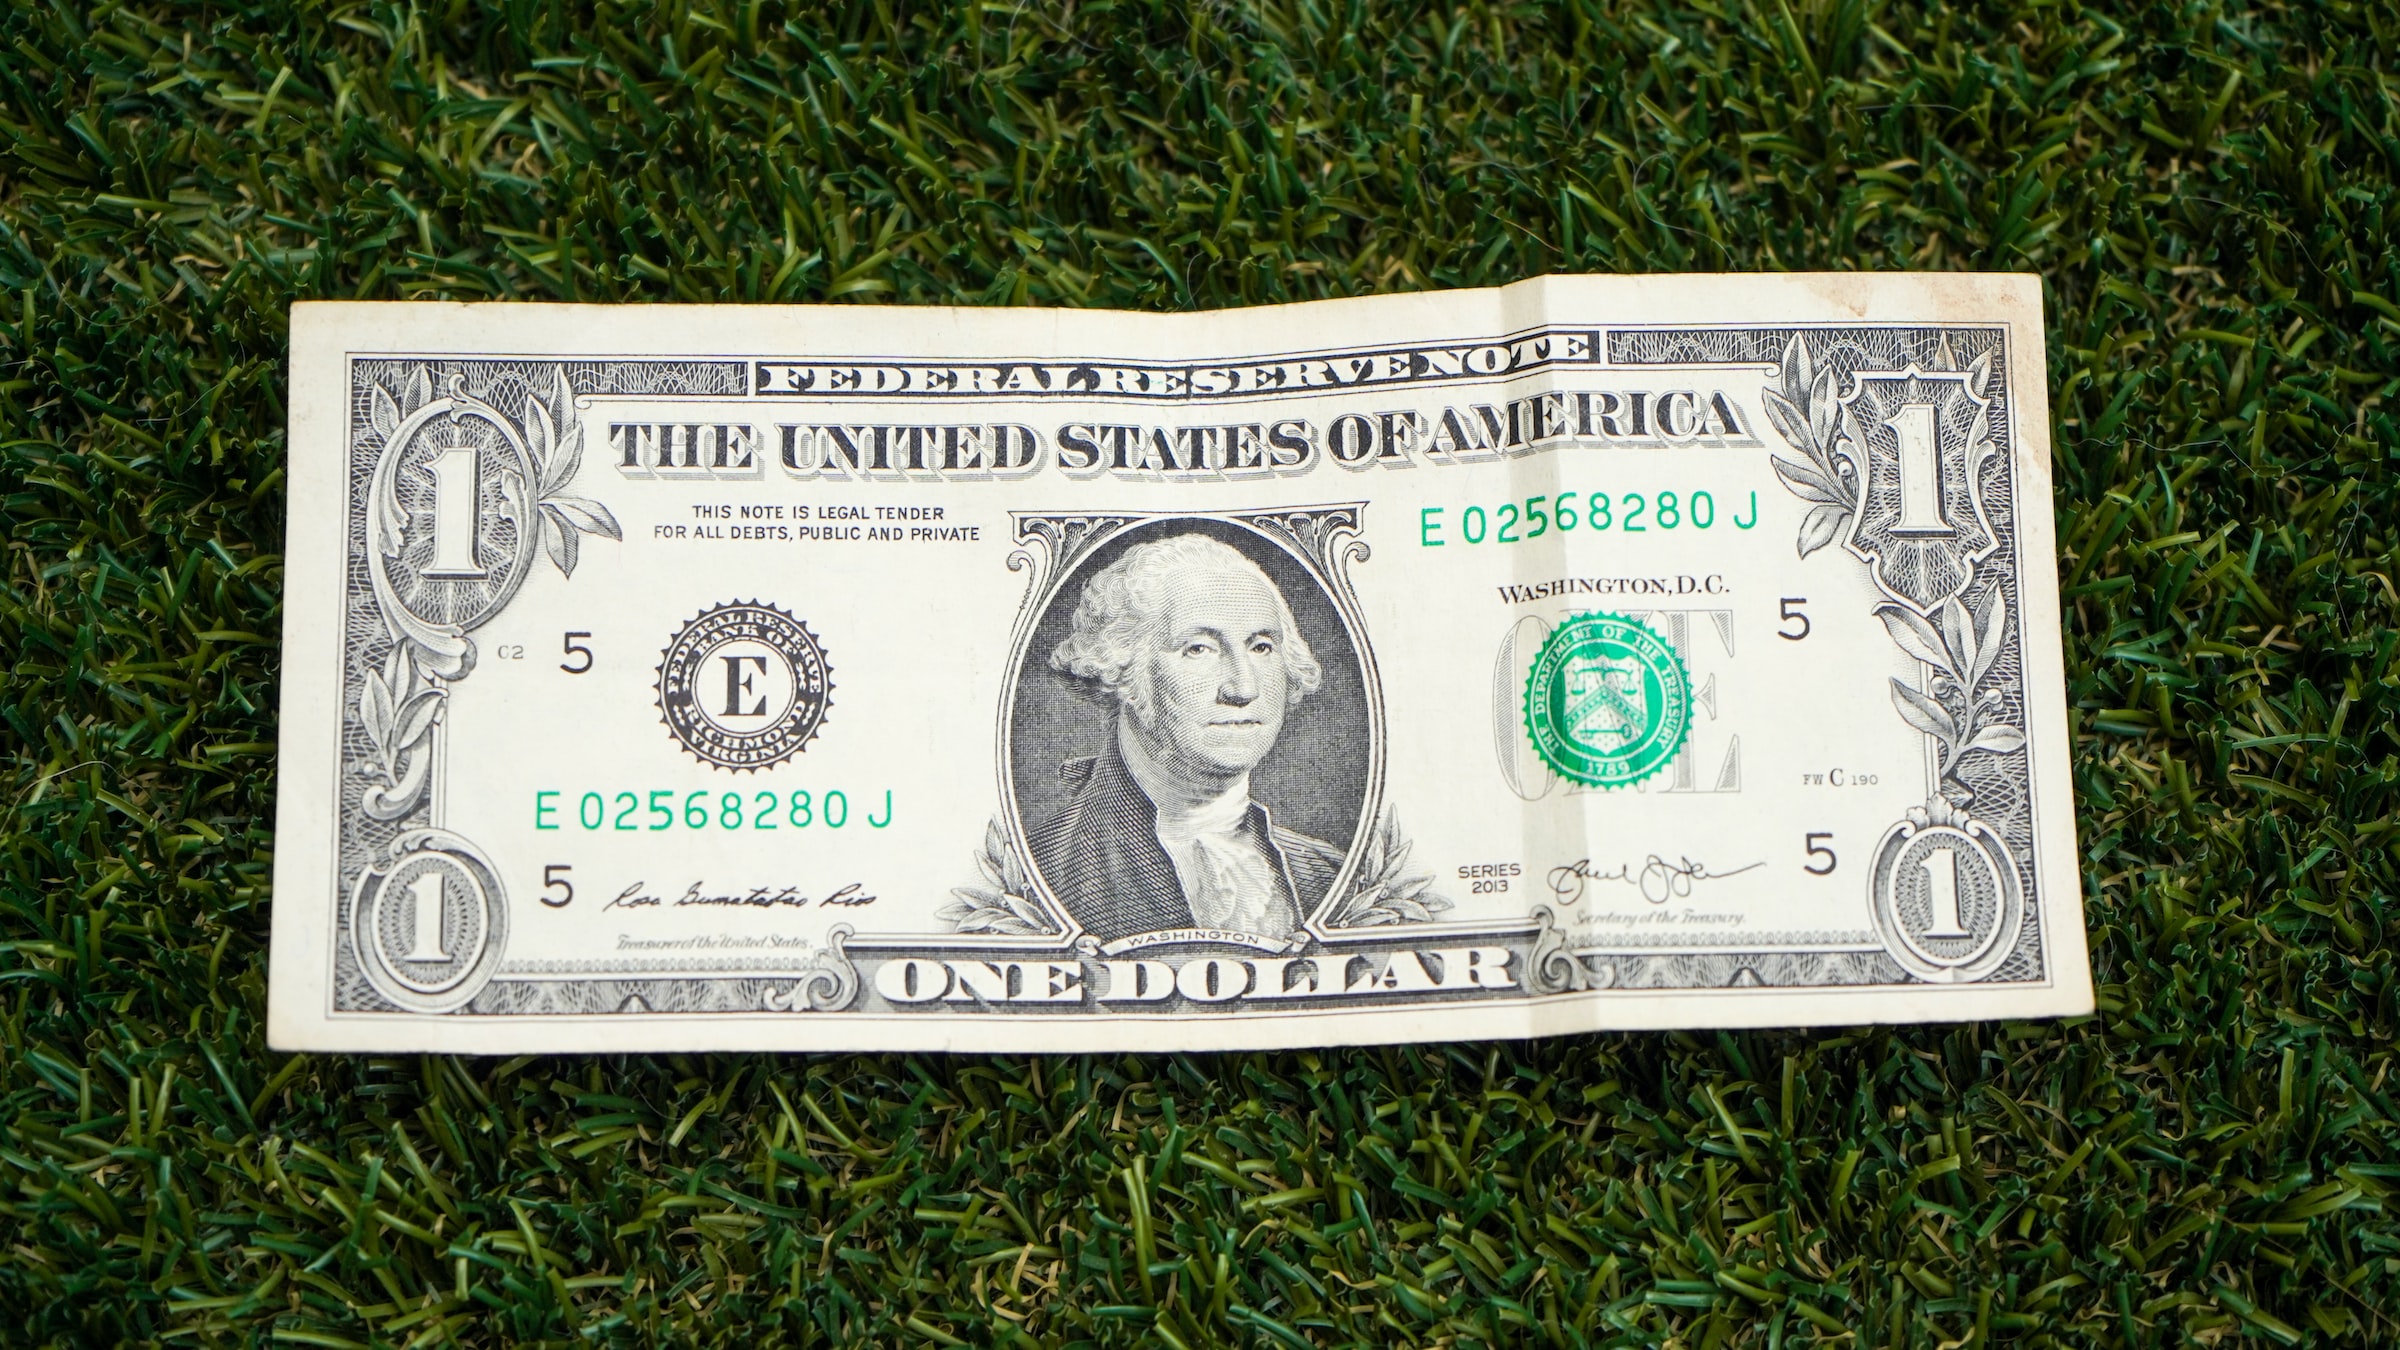 A one-dollar bill is displayed against a grass background